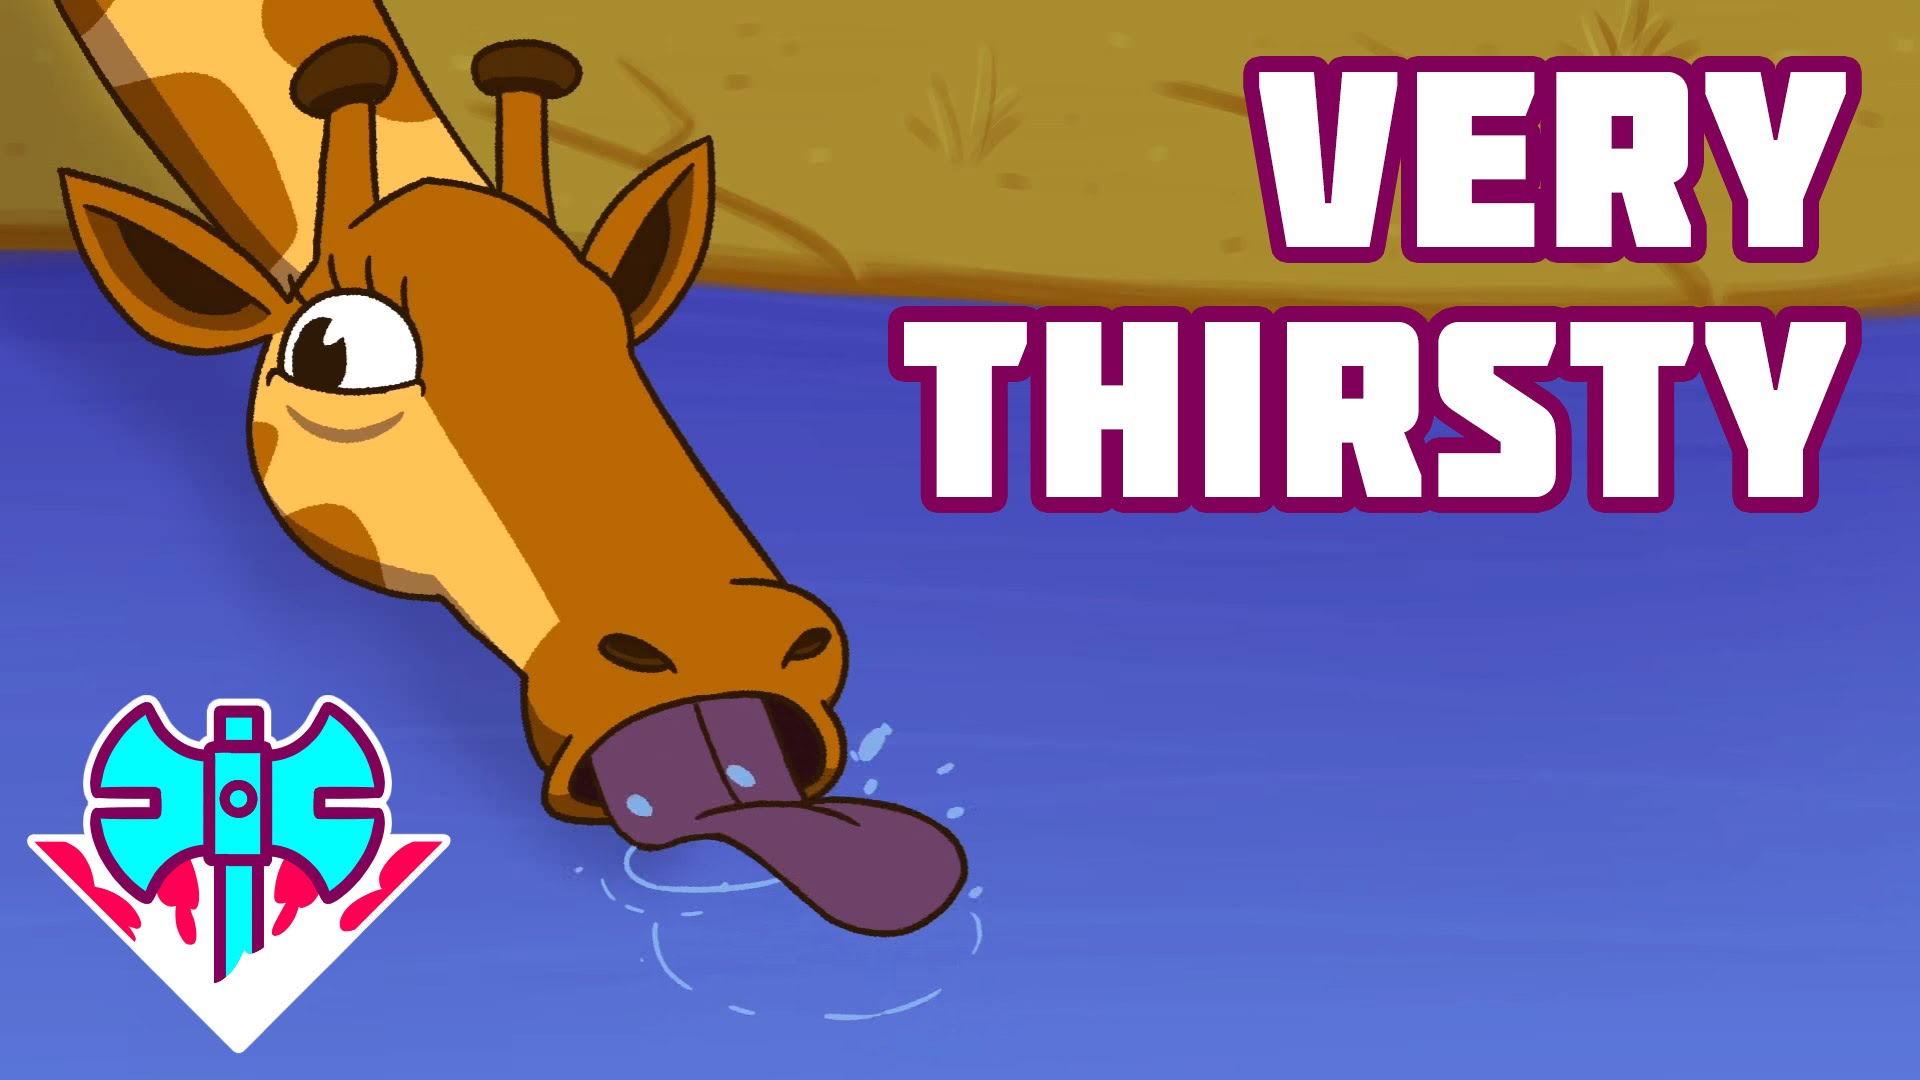 Thirsty. Very thirsty. Nick thirsty. Hot animals thirsty. Is was very thirsty